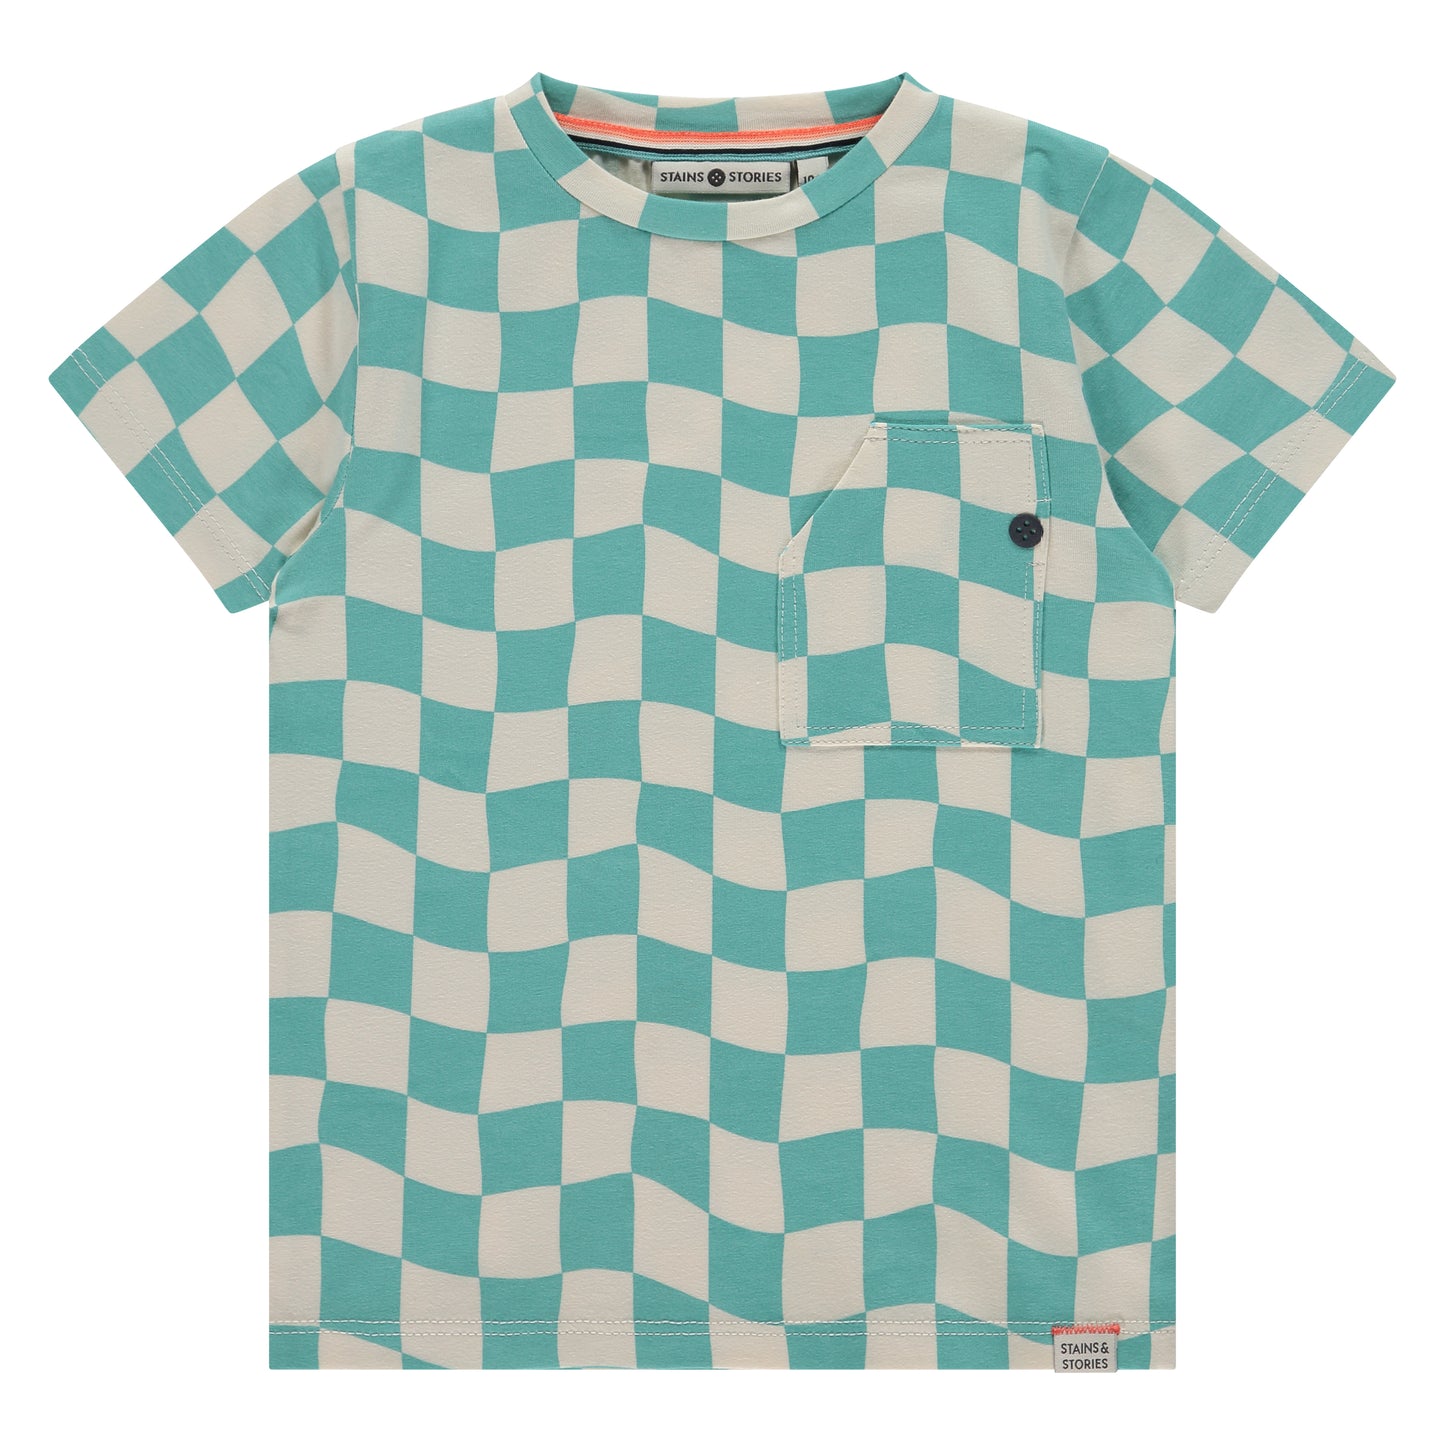 Stains & Stories Shirt - Turquoise